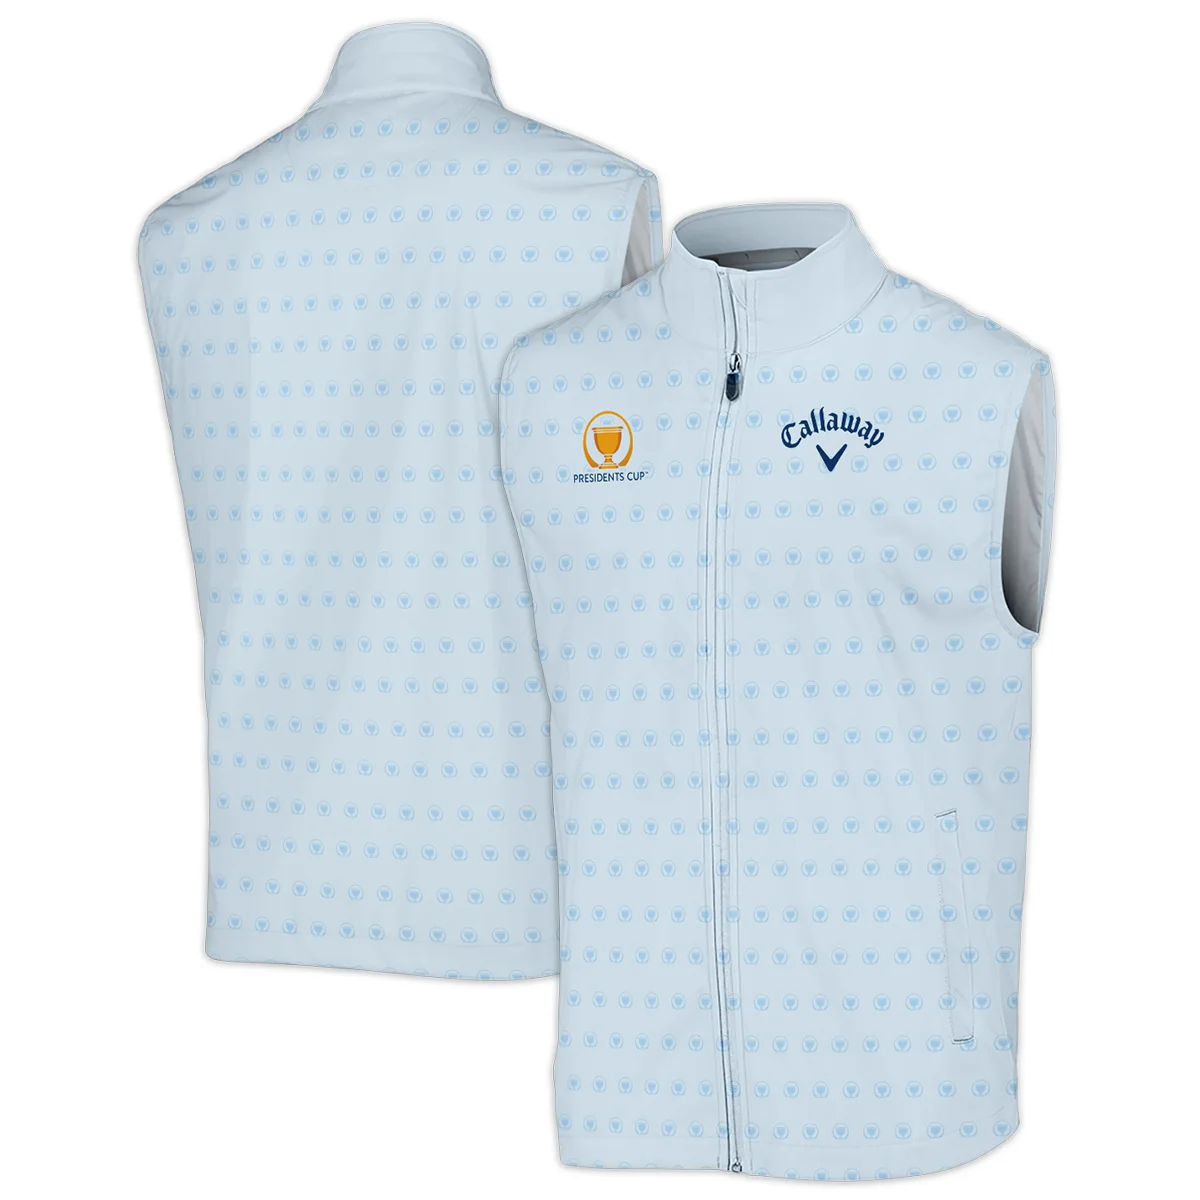 Presidents Cup Light Blue Golf Purple Patern Background Callaway Sleeveless Jacket Style Classic